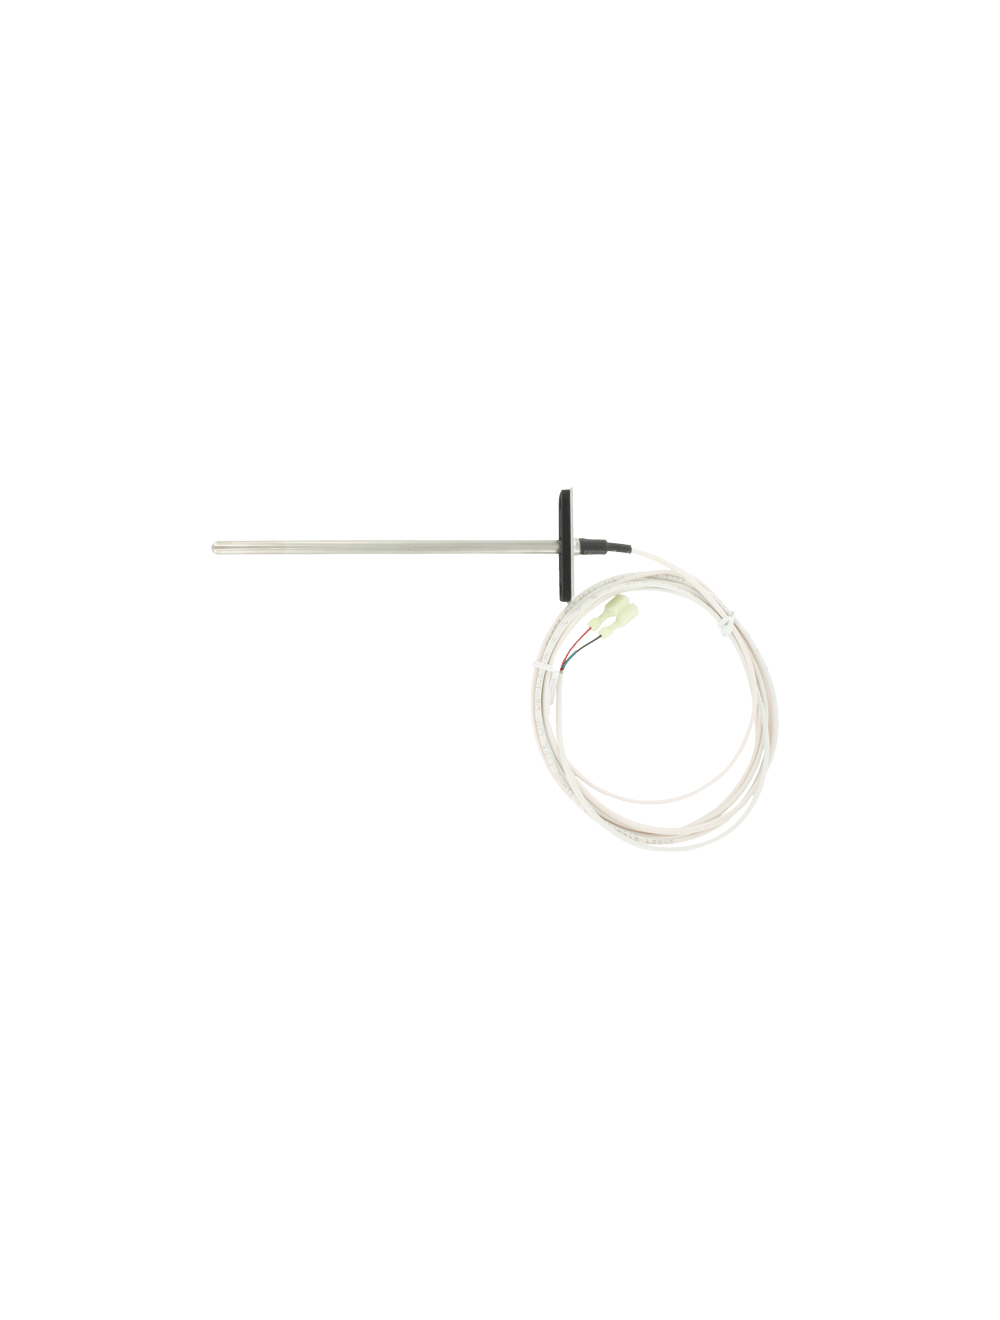 Series TE Duct and Immersion Temperature Sensor | Dwyer